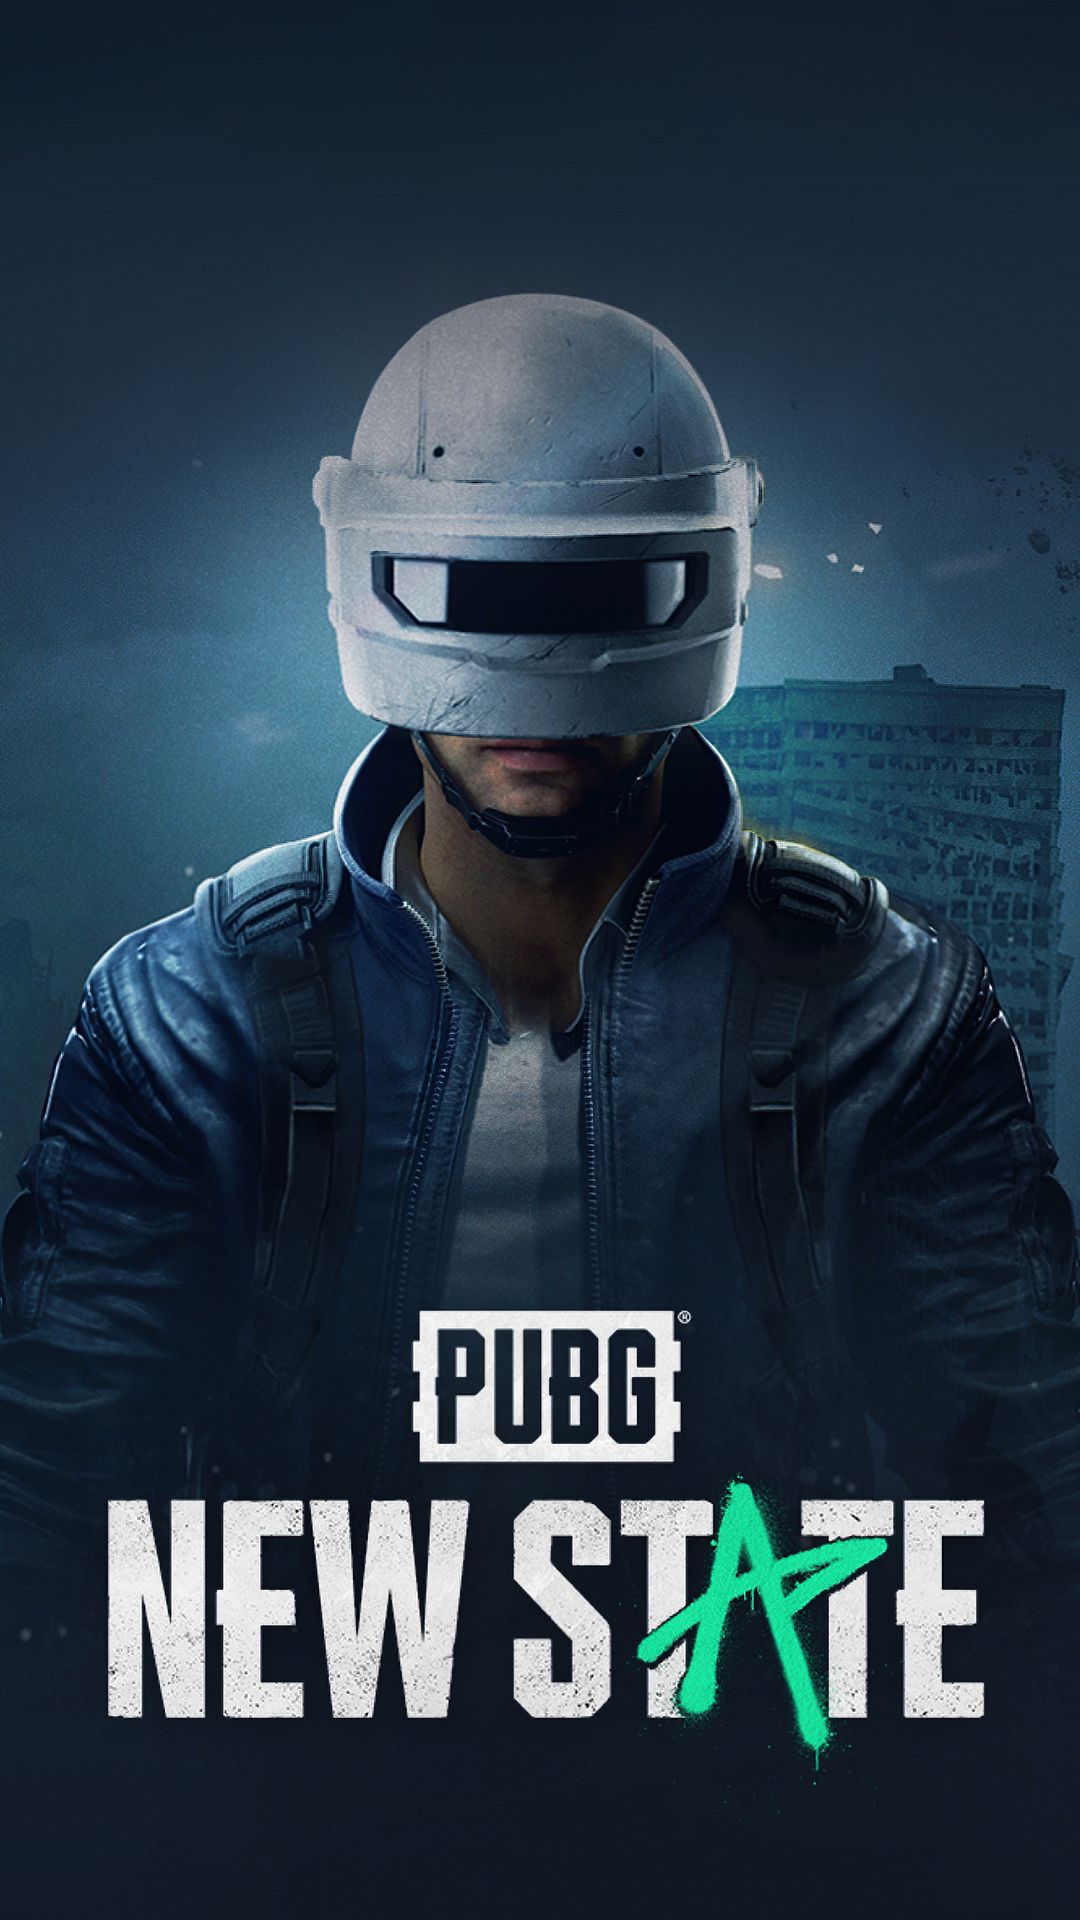 PUBG New State Wallpapers - Top 20 Best PUBG New State Backgrounds Download